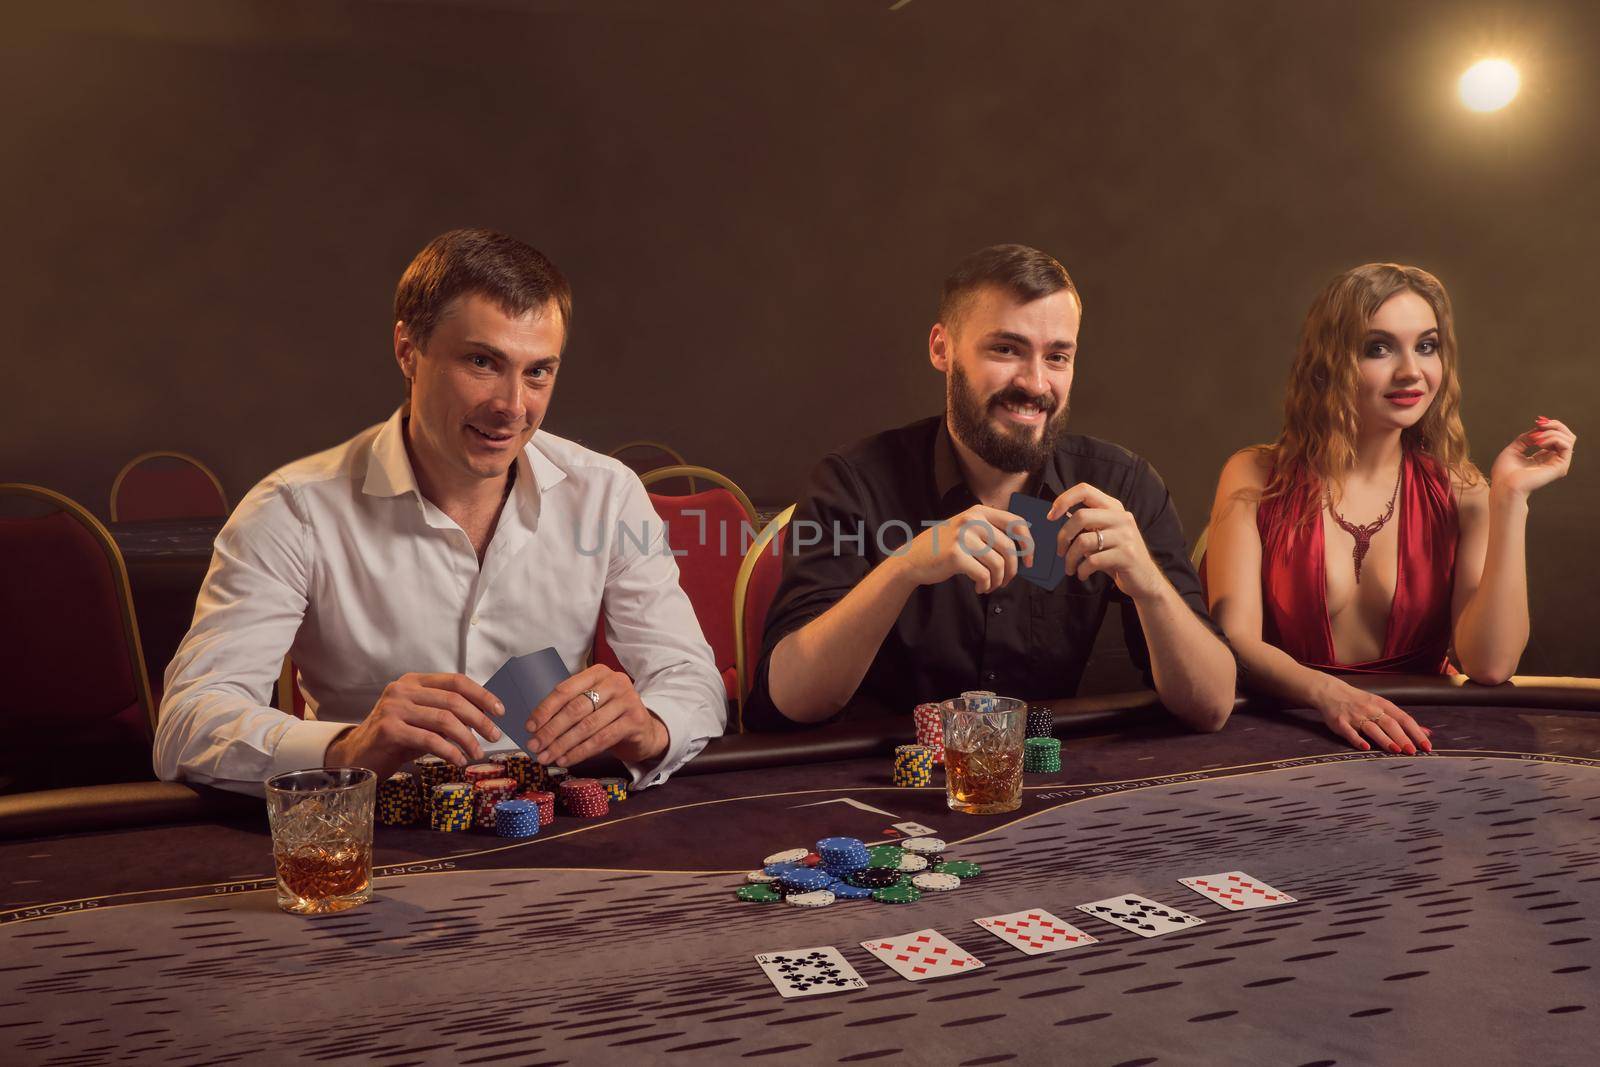 Two wealthy friends and beautiful woman are playing poker at casino. They are making bets waiting for a big win, smiling and looking at the camera while posing sitting at the table against a yellow backlight on dark background. Cards, chips, money, gambling, entertainment concept.